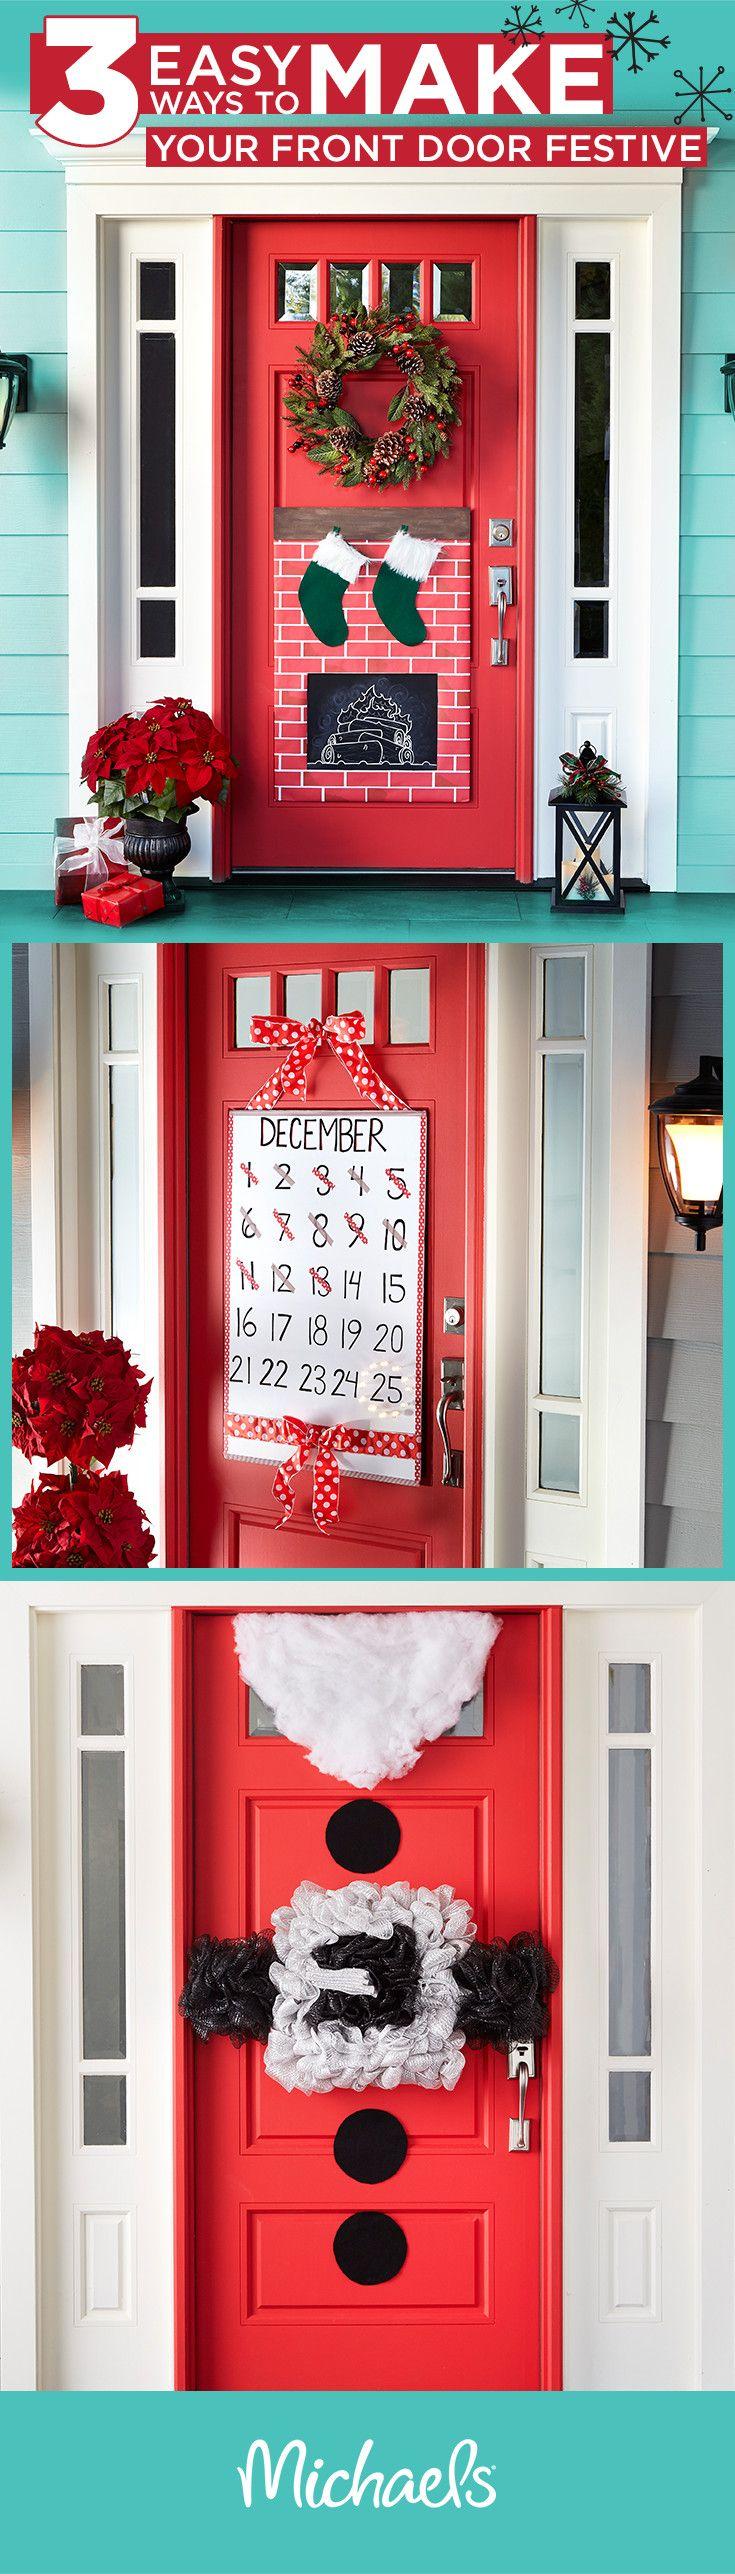 10 Christmas door decor ideas to welcome guests to your festive home 